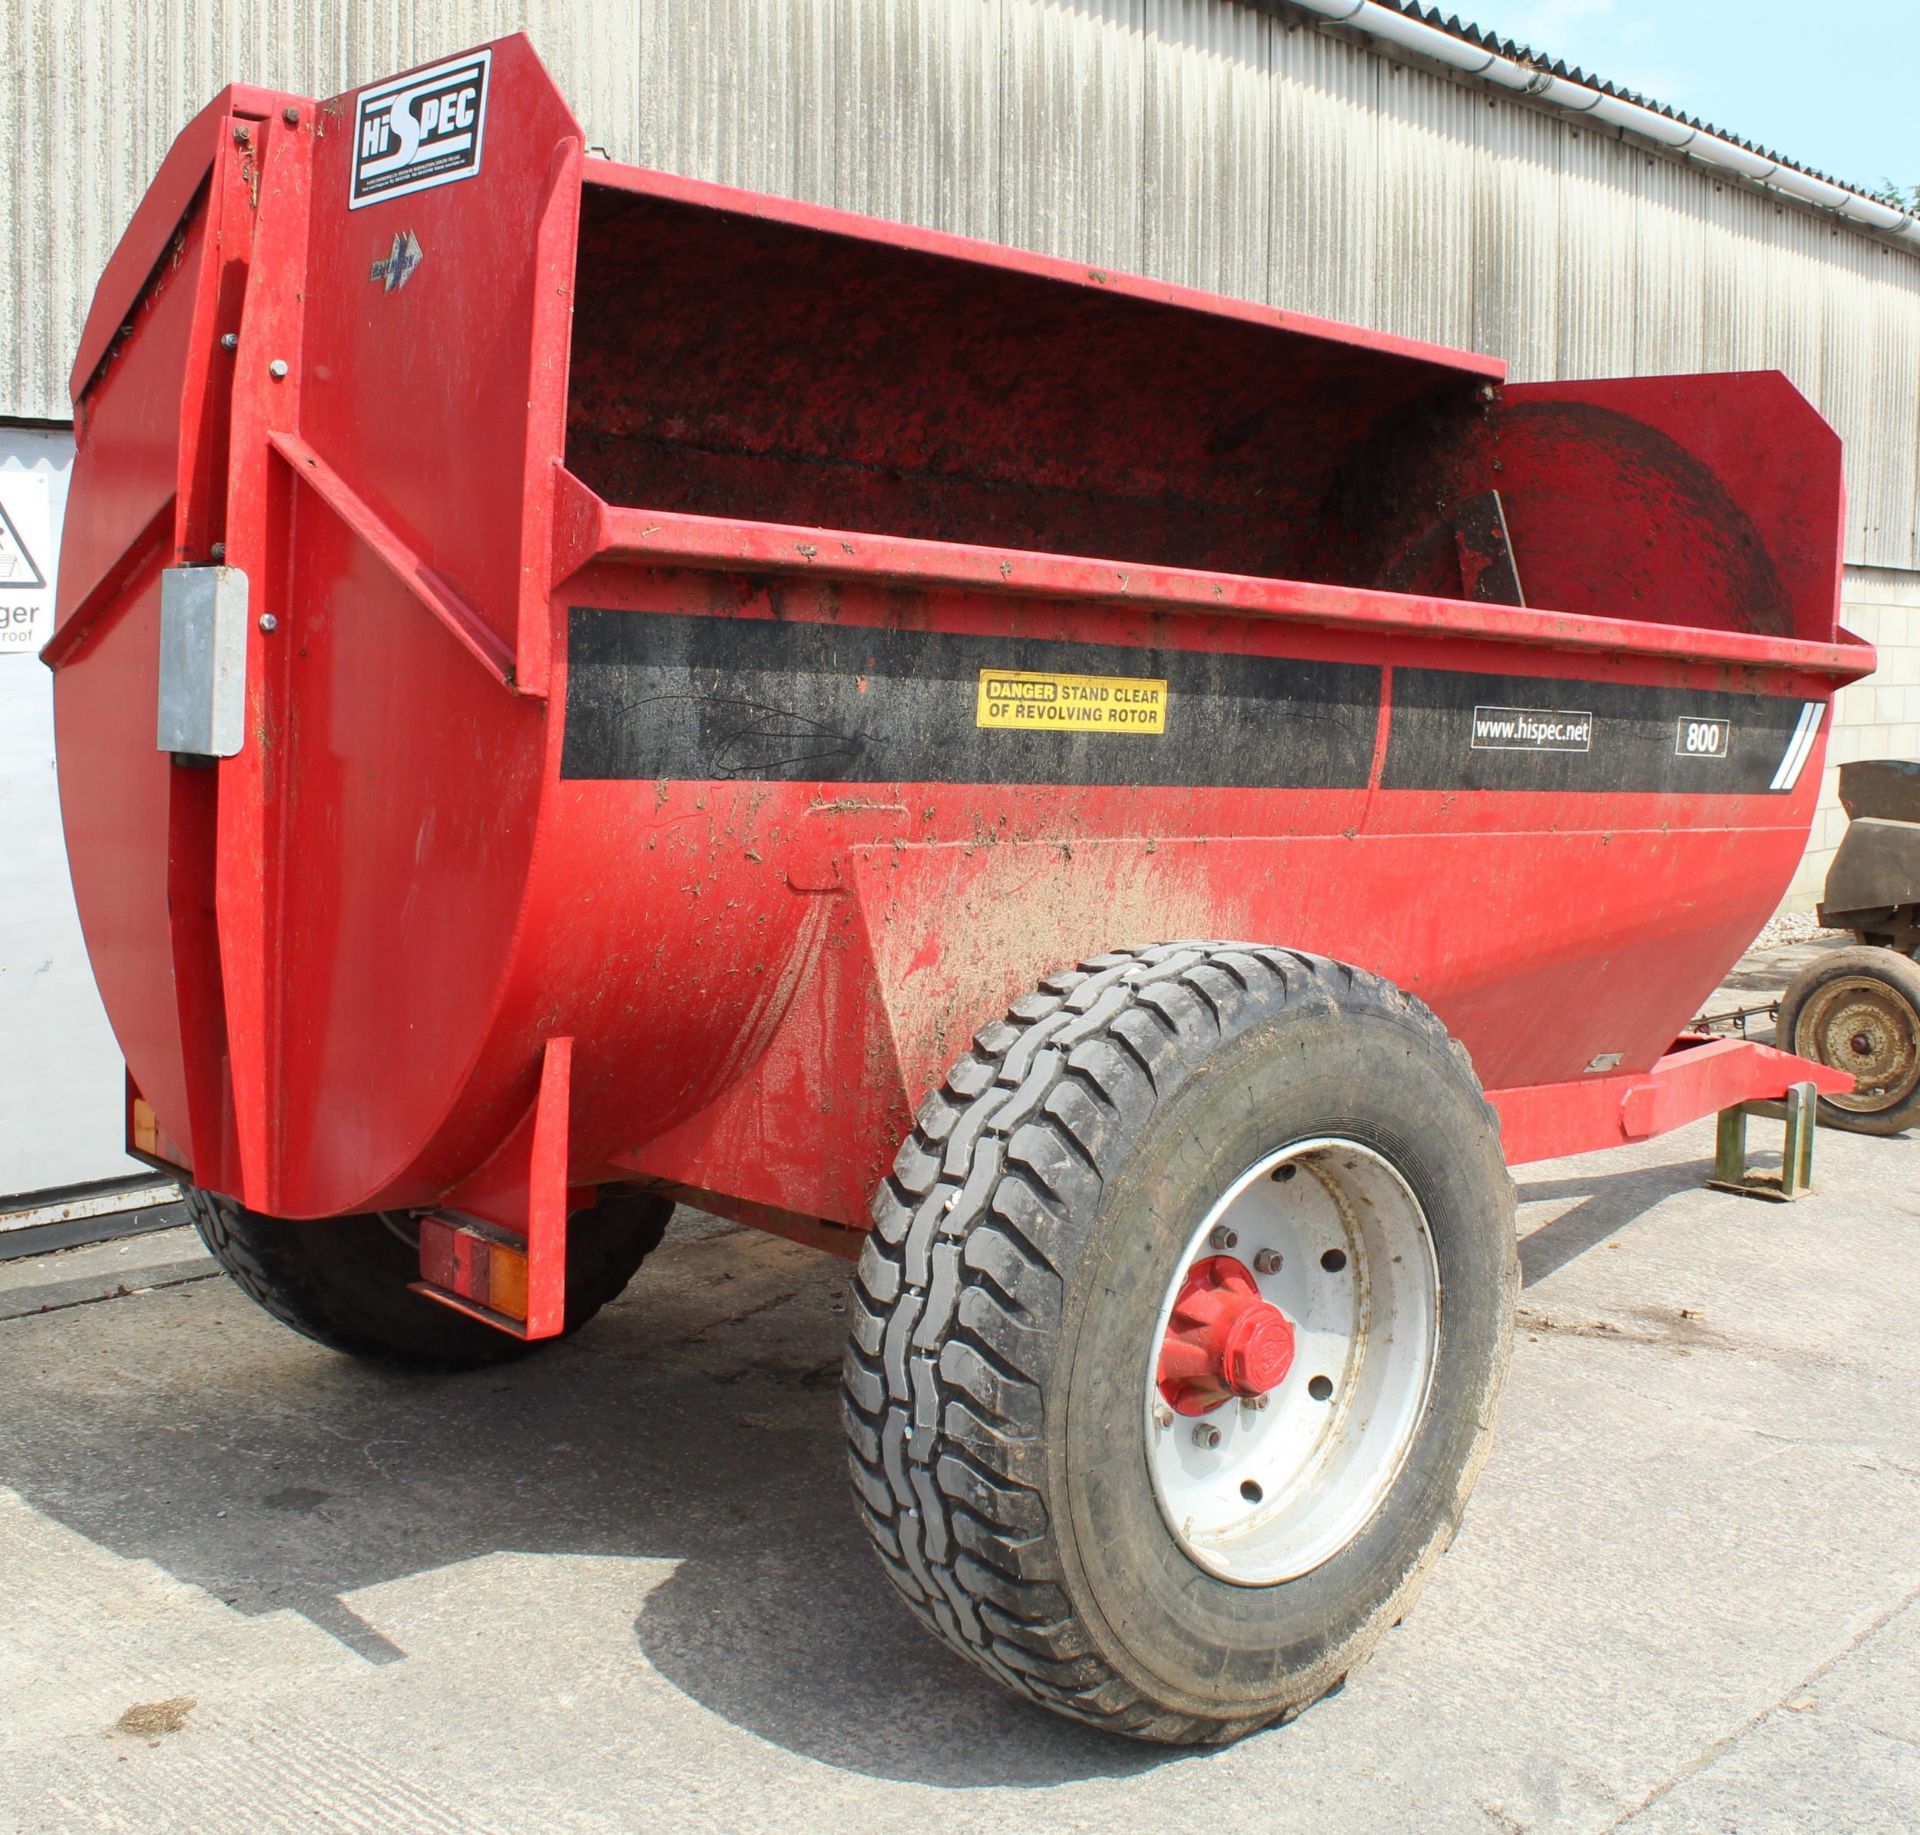 HI SPEC 800 MANURE SPREADER 2005 - 8 CUBIC METERS -VERY LITTLE USED PTO TO BE COLLECTED FROM THE PAY - Image 2 of 3